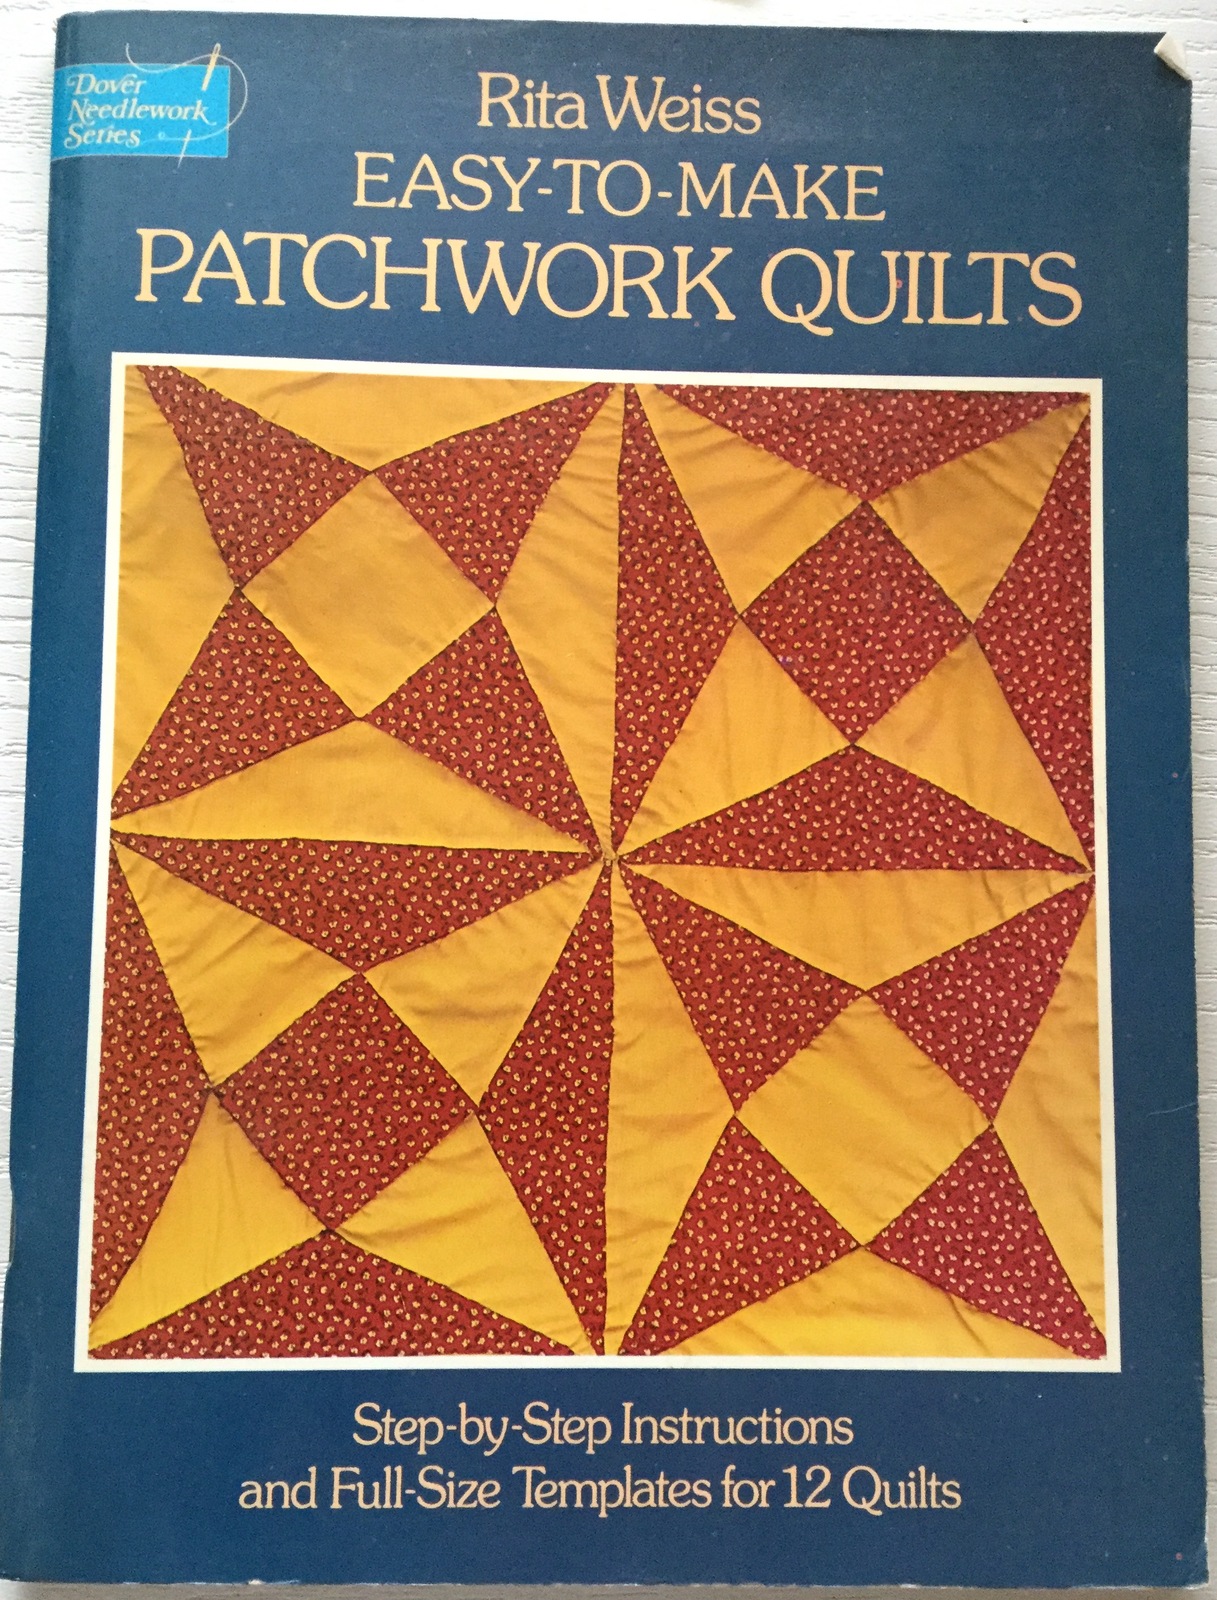 Easy-To-Make Patchwork Quilts by Rita Weiss - Quilt Patterns